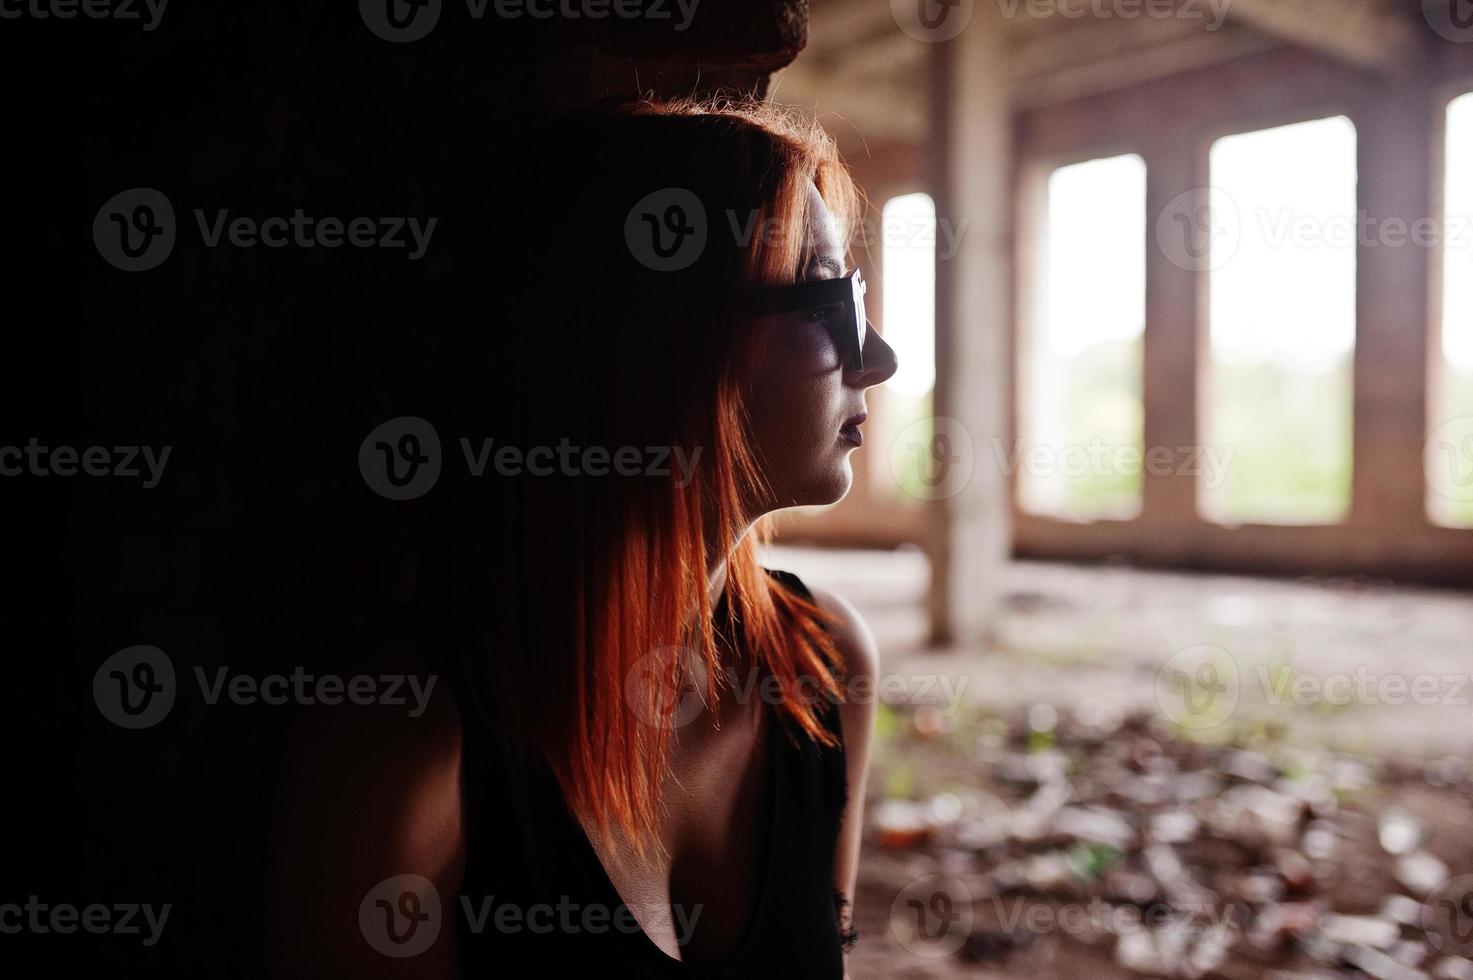 Red haired stylish girl in sunglasses wear in black, against abadoned place with brick walls. photo